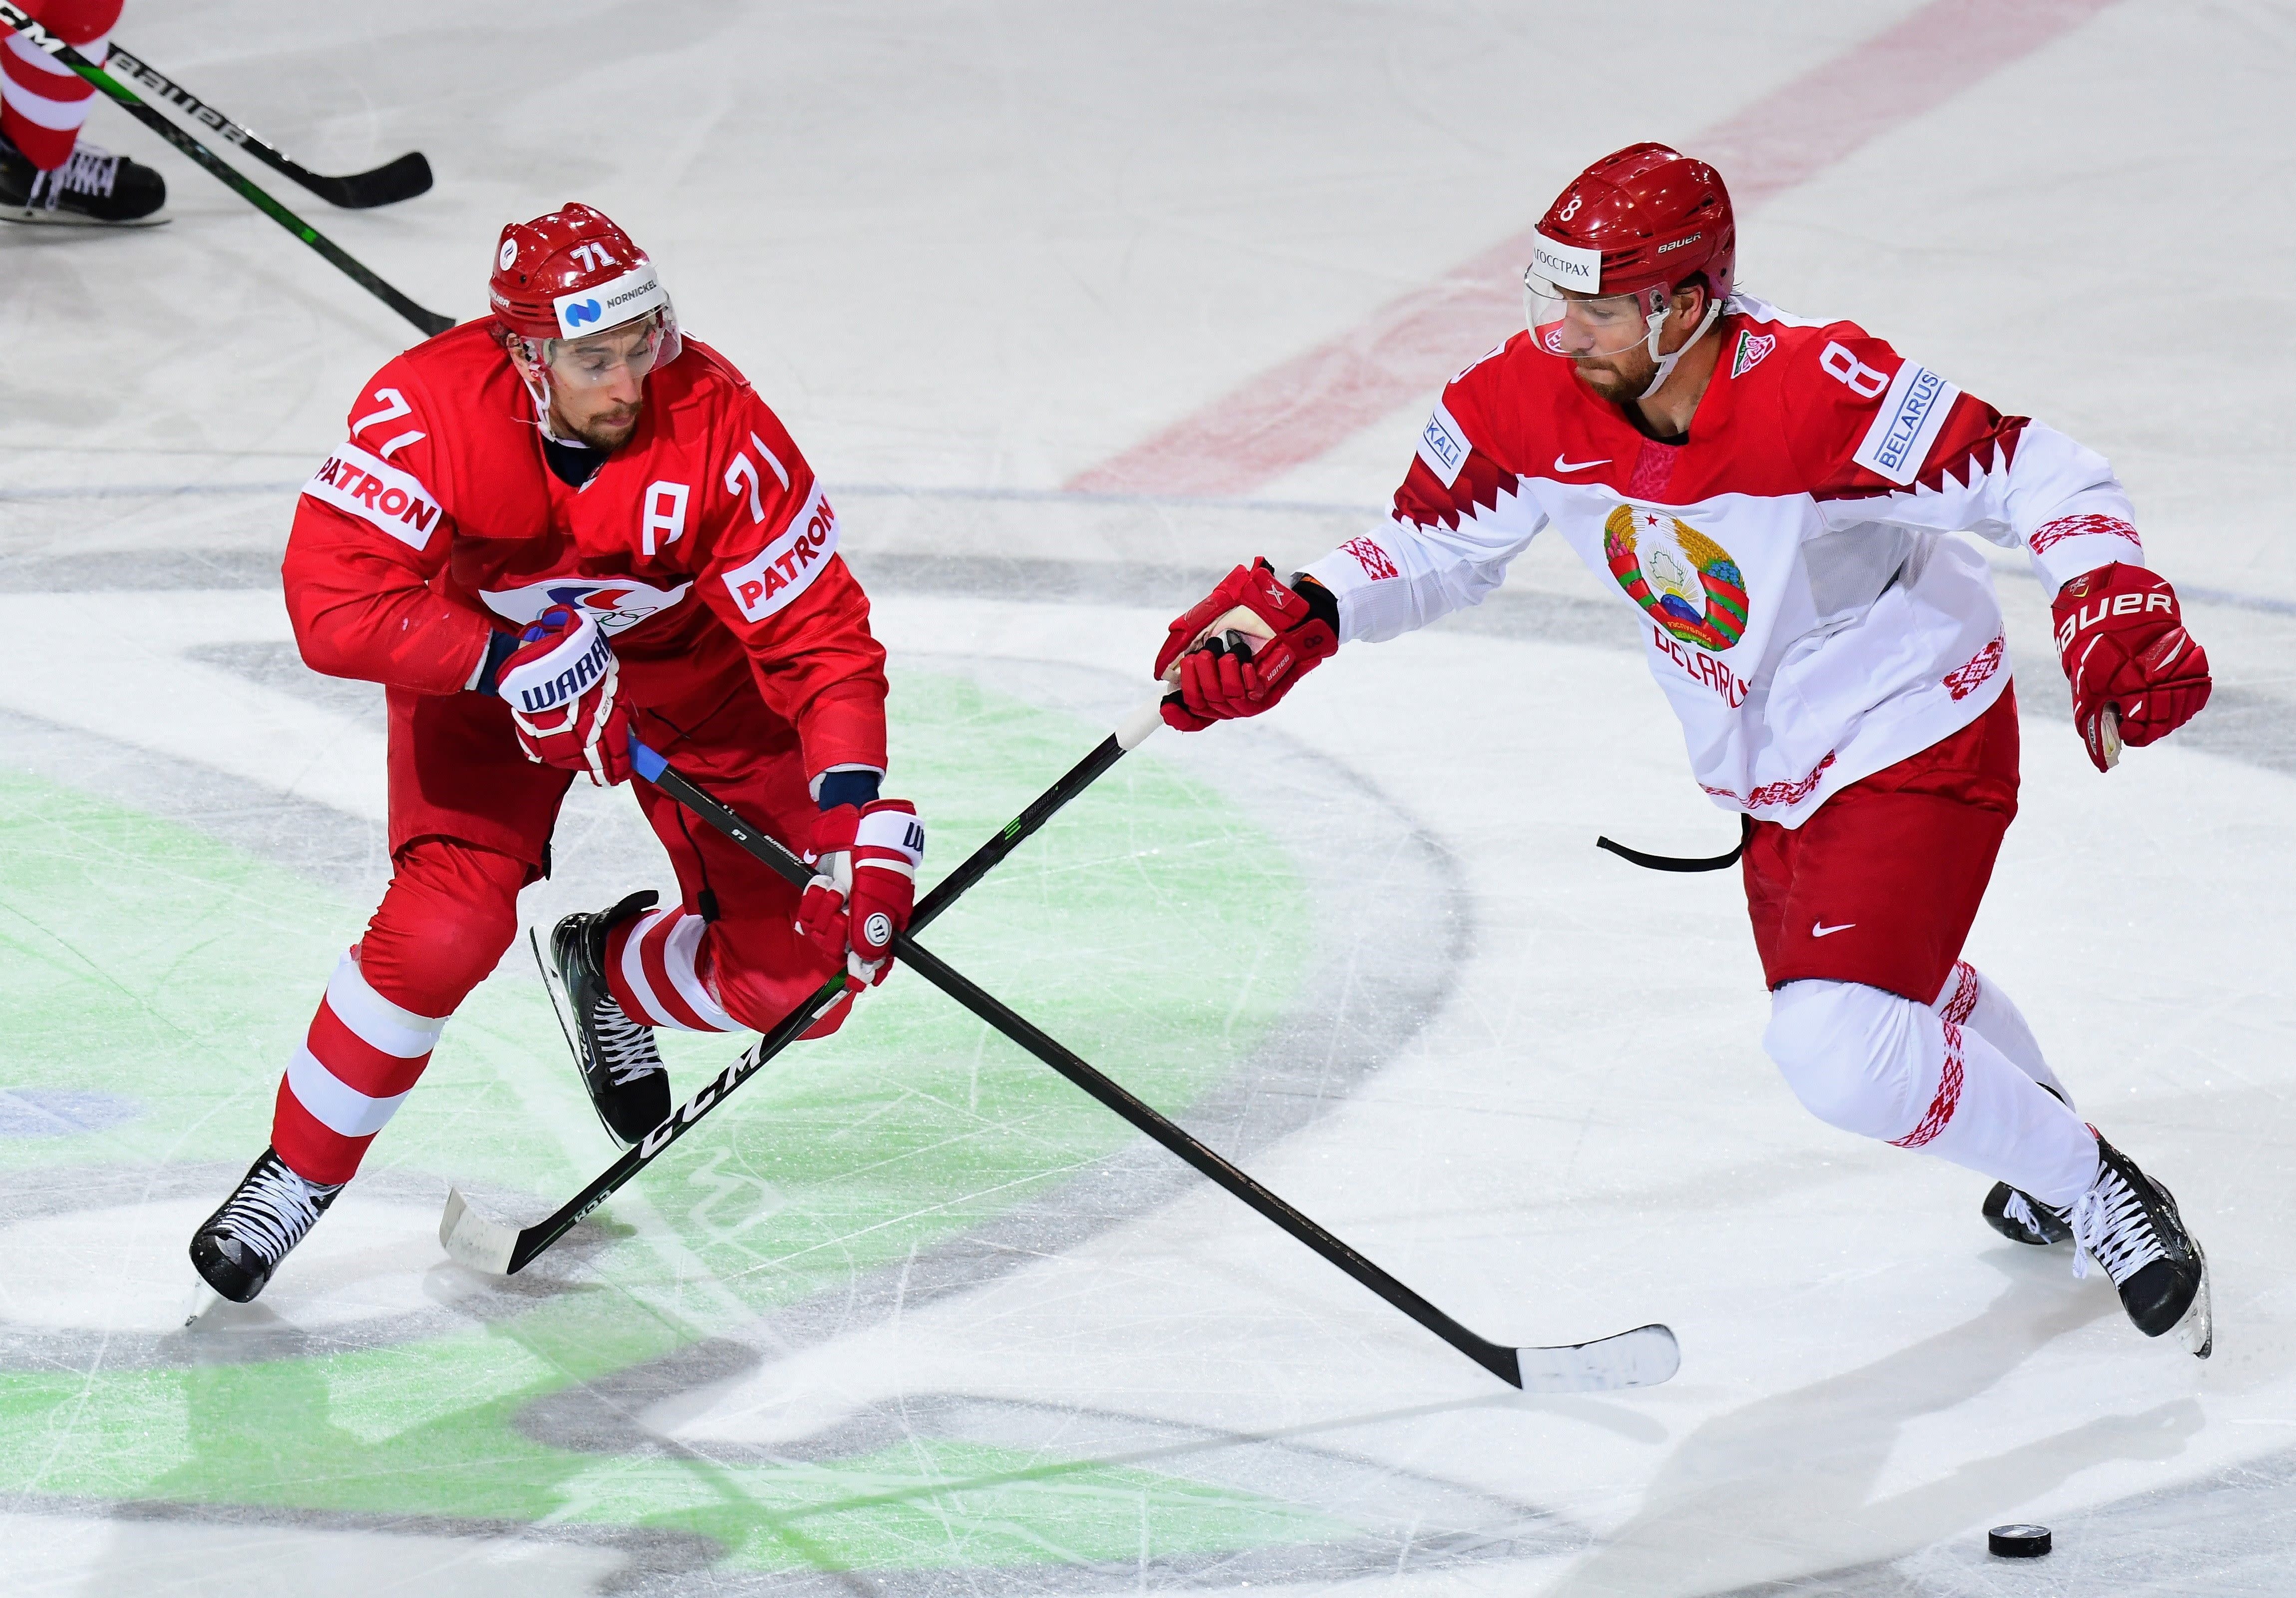 Russia and Belarus do not play in the hockey world in Finland